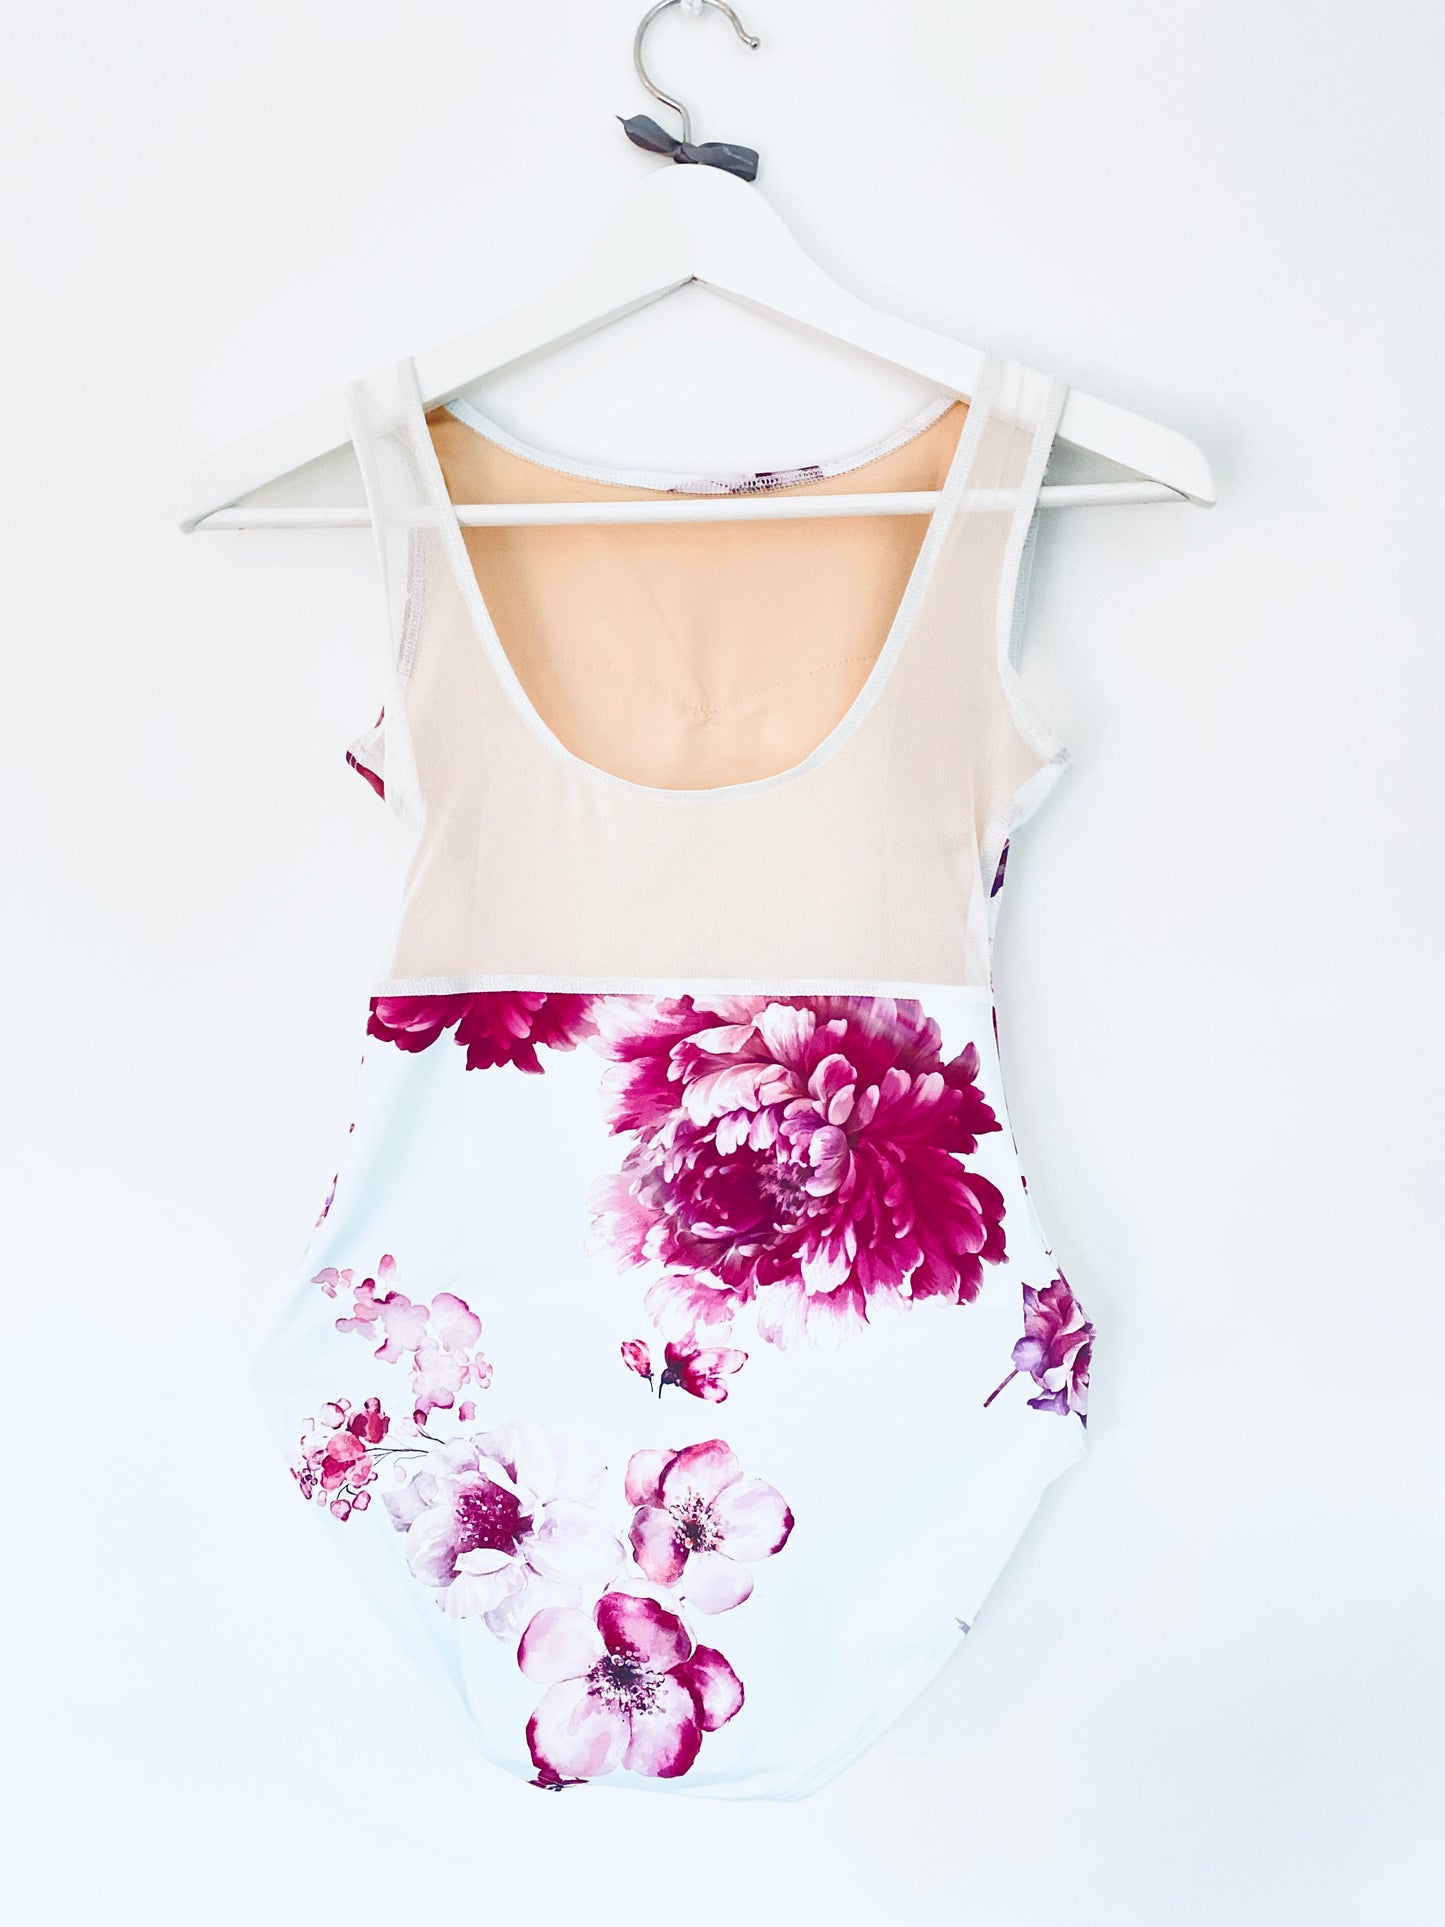 Leotard in pale blue with burgundy flower pattern from The Collective Dancewear